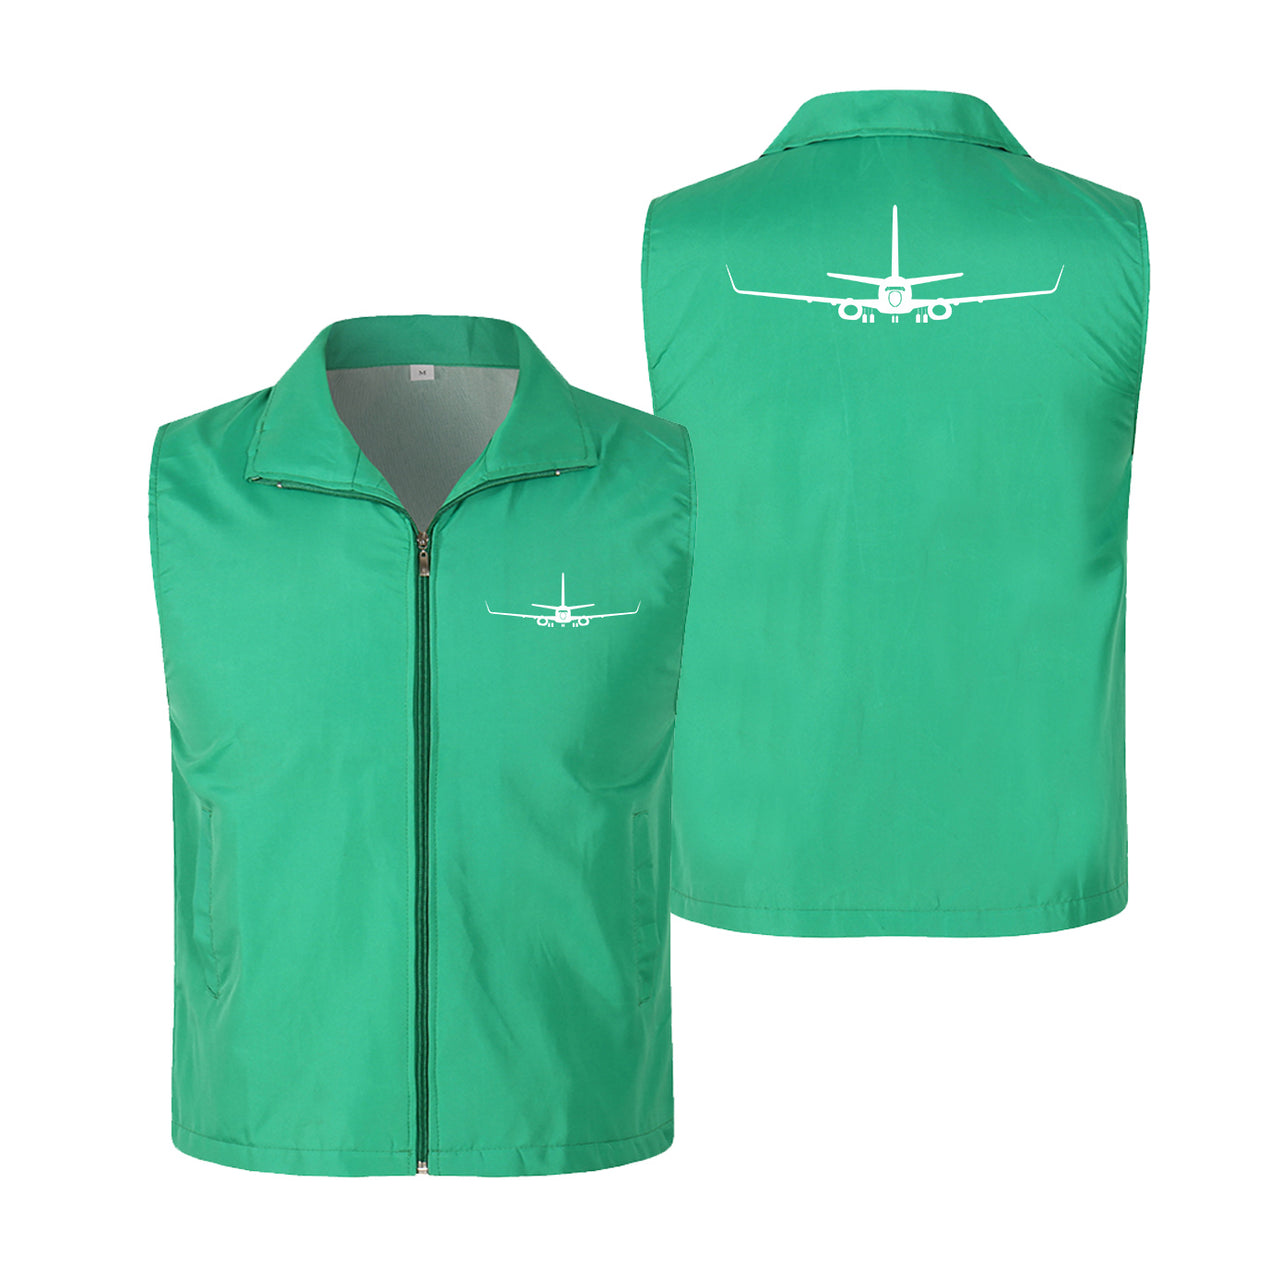 Boeing 737-800NG Silhouette Designed Thin Style Vests